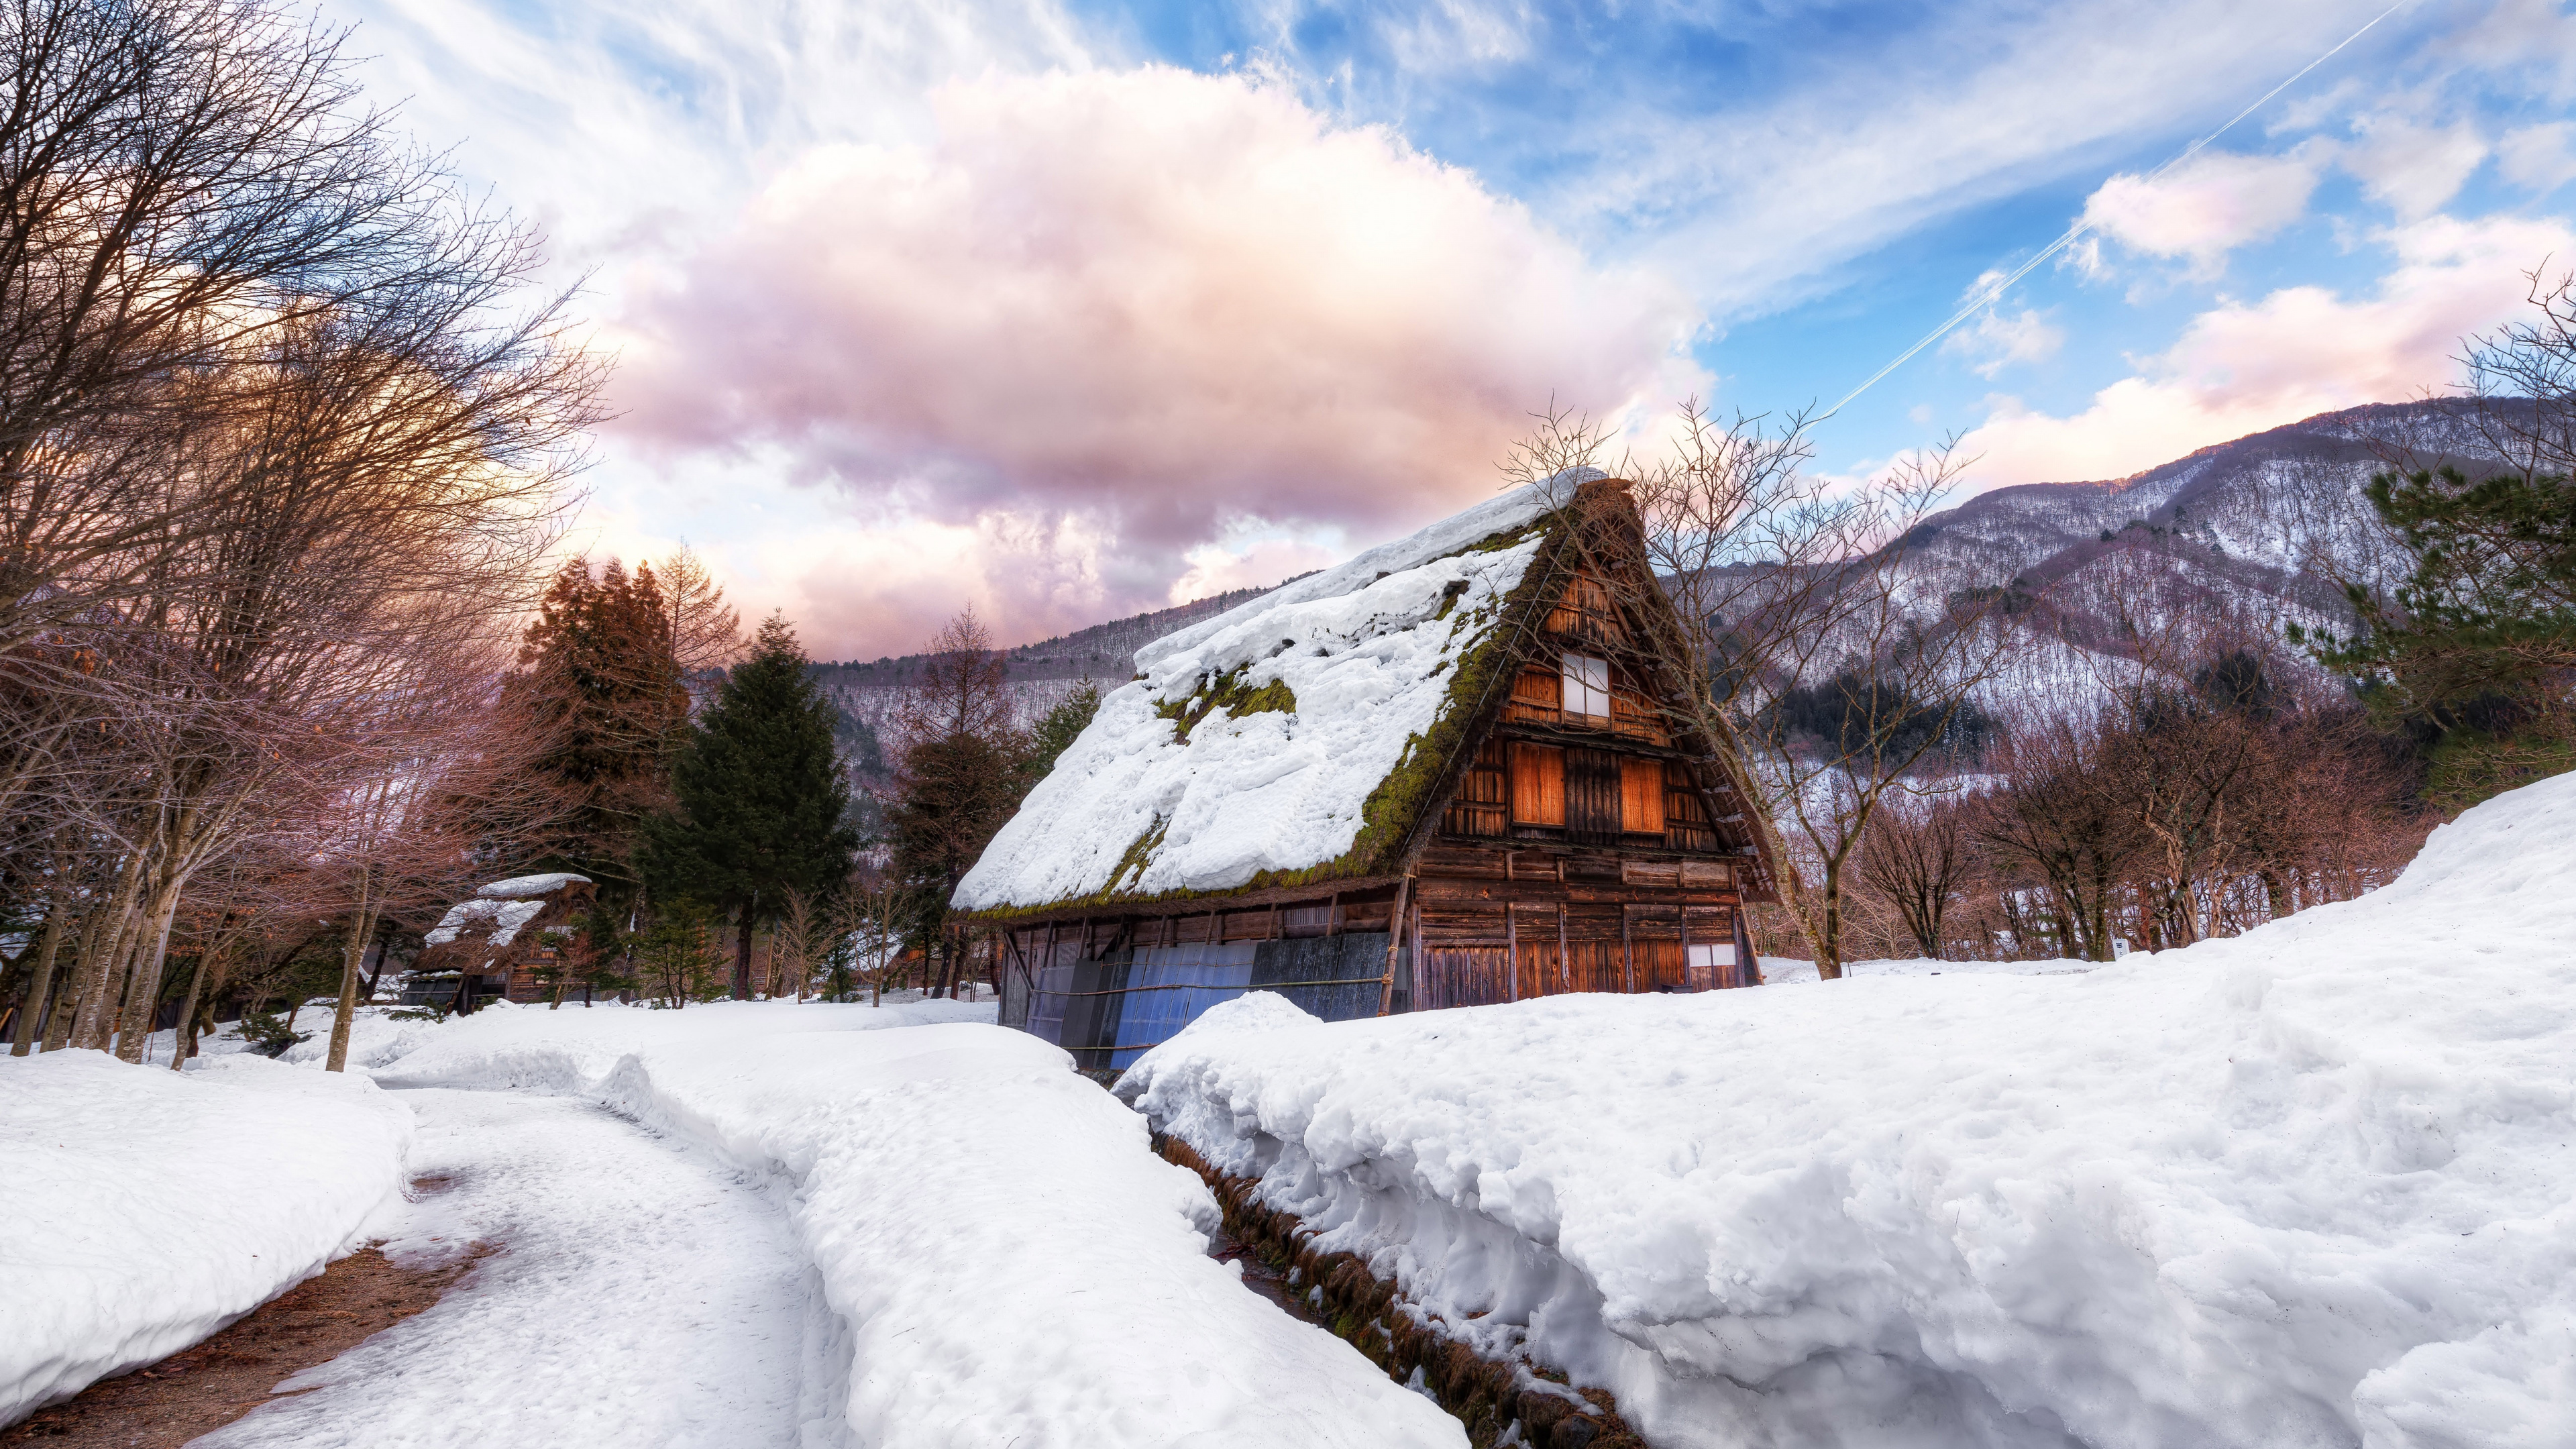 Brown Wooden House on Snow Covered Ground Under White Clouds and Blue Sky During Daytime. Wallpaper in 3840x2160 Resolution